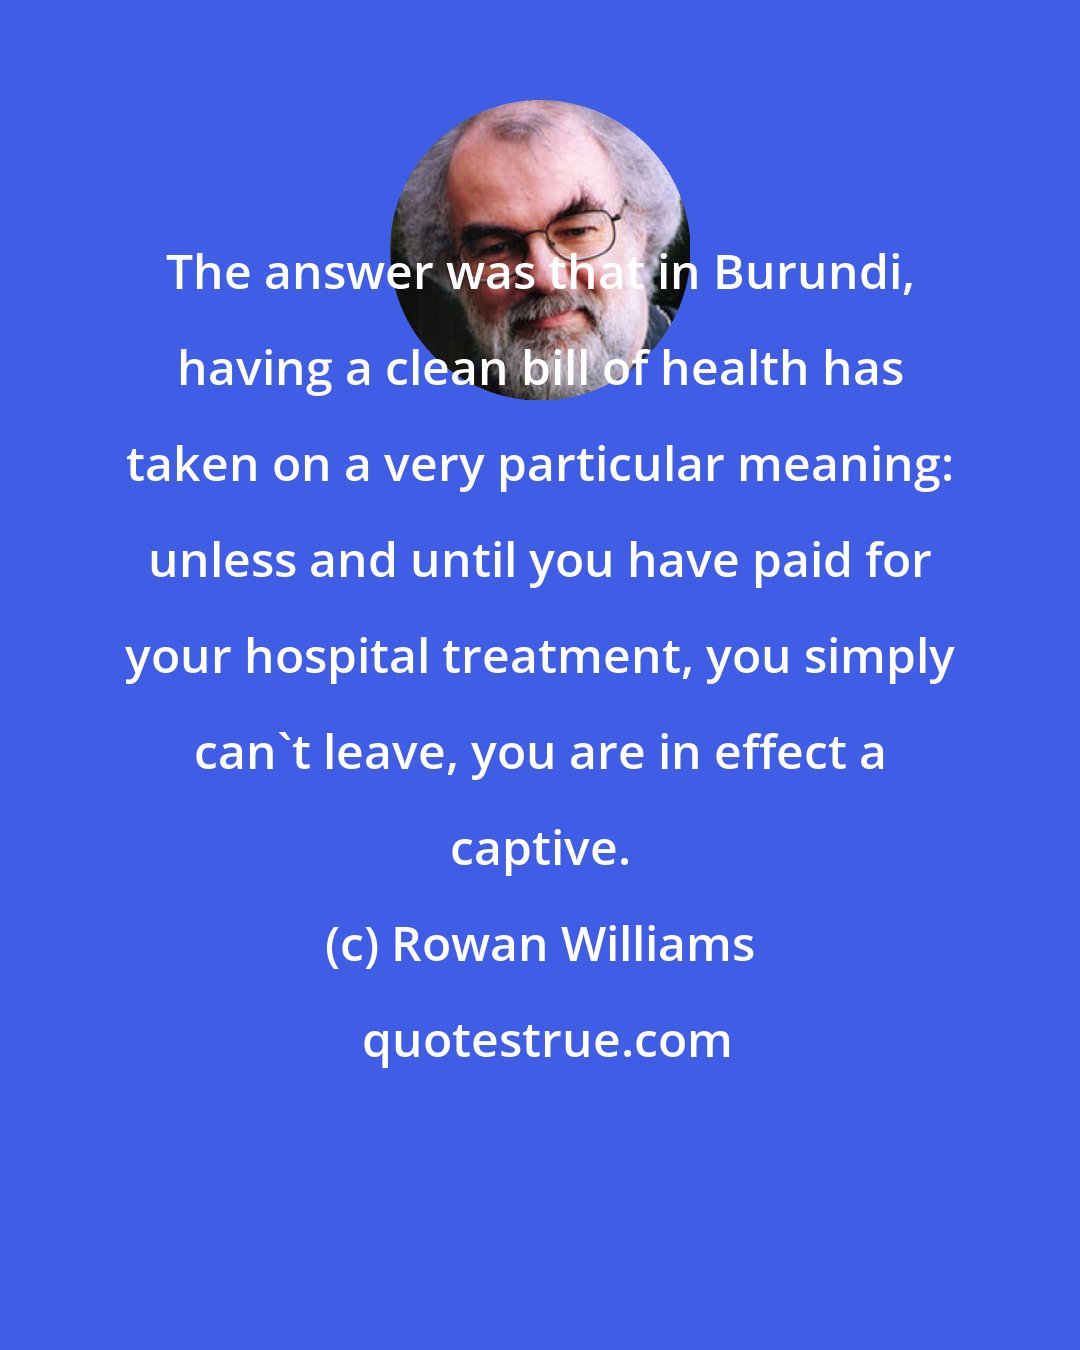 Rowan Williams: The answer was that in Burundi, having a clean bill of health has taken on a very particular meaning: unless and until you have paid for your hospital treatment, you simply can't leave, you are in effect a captive.